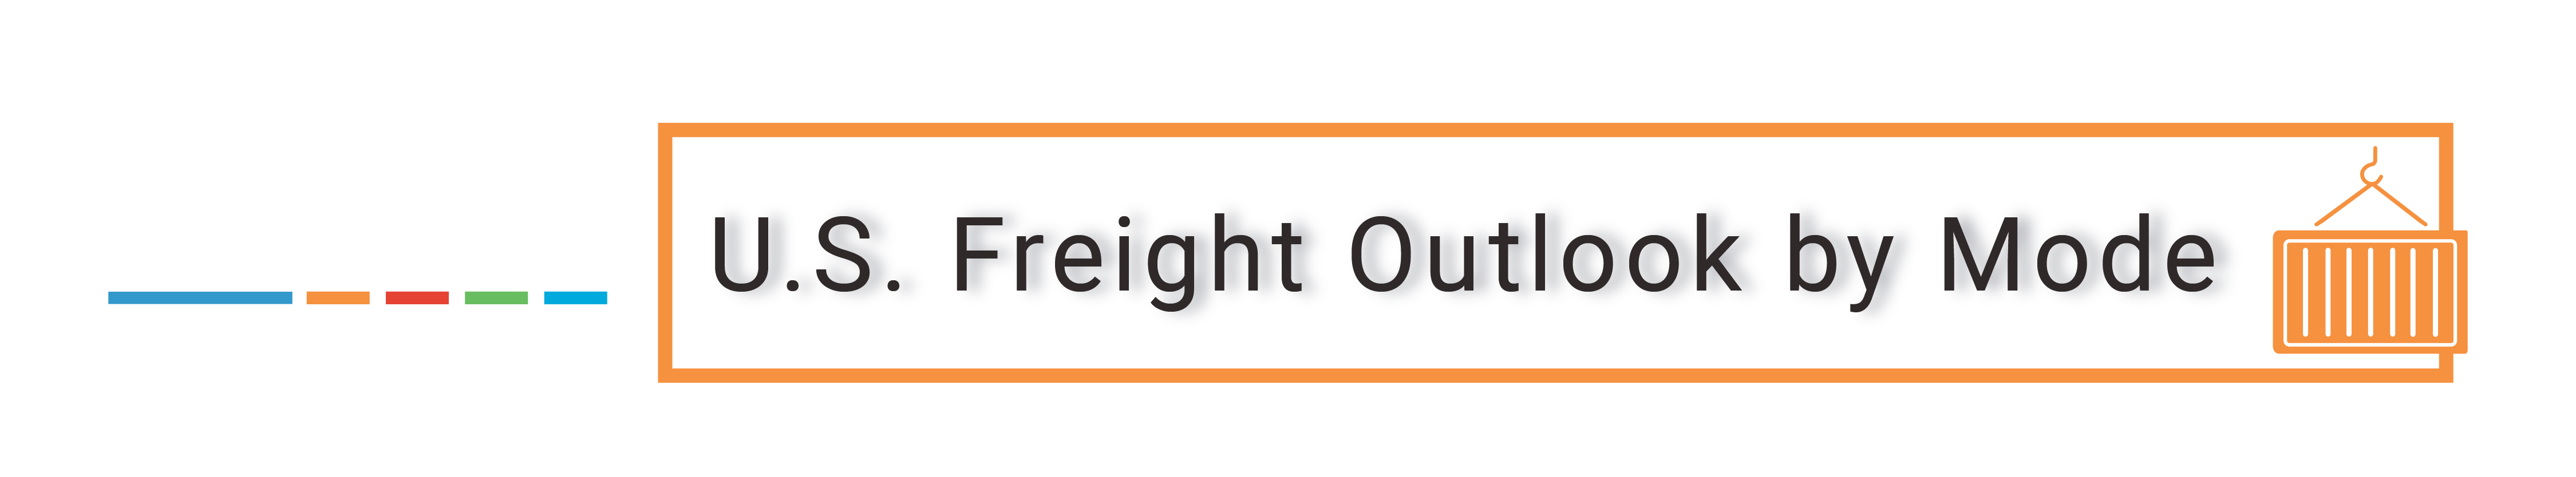 FTR 2022 Subscriptions Product Sublogos_light version_U.S. Freight Outlook by Mode(1)